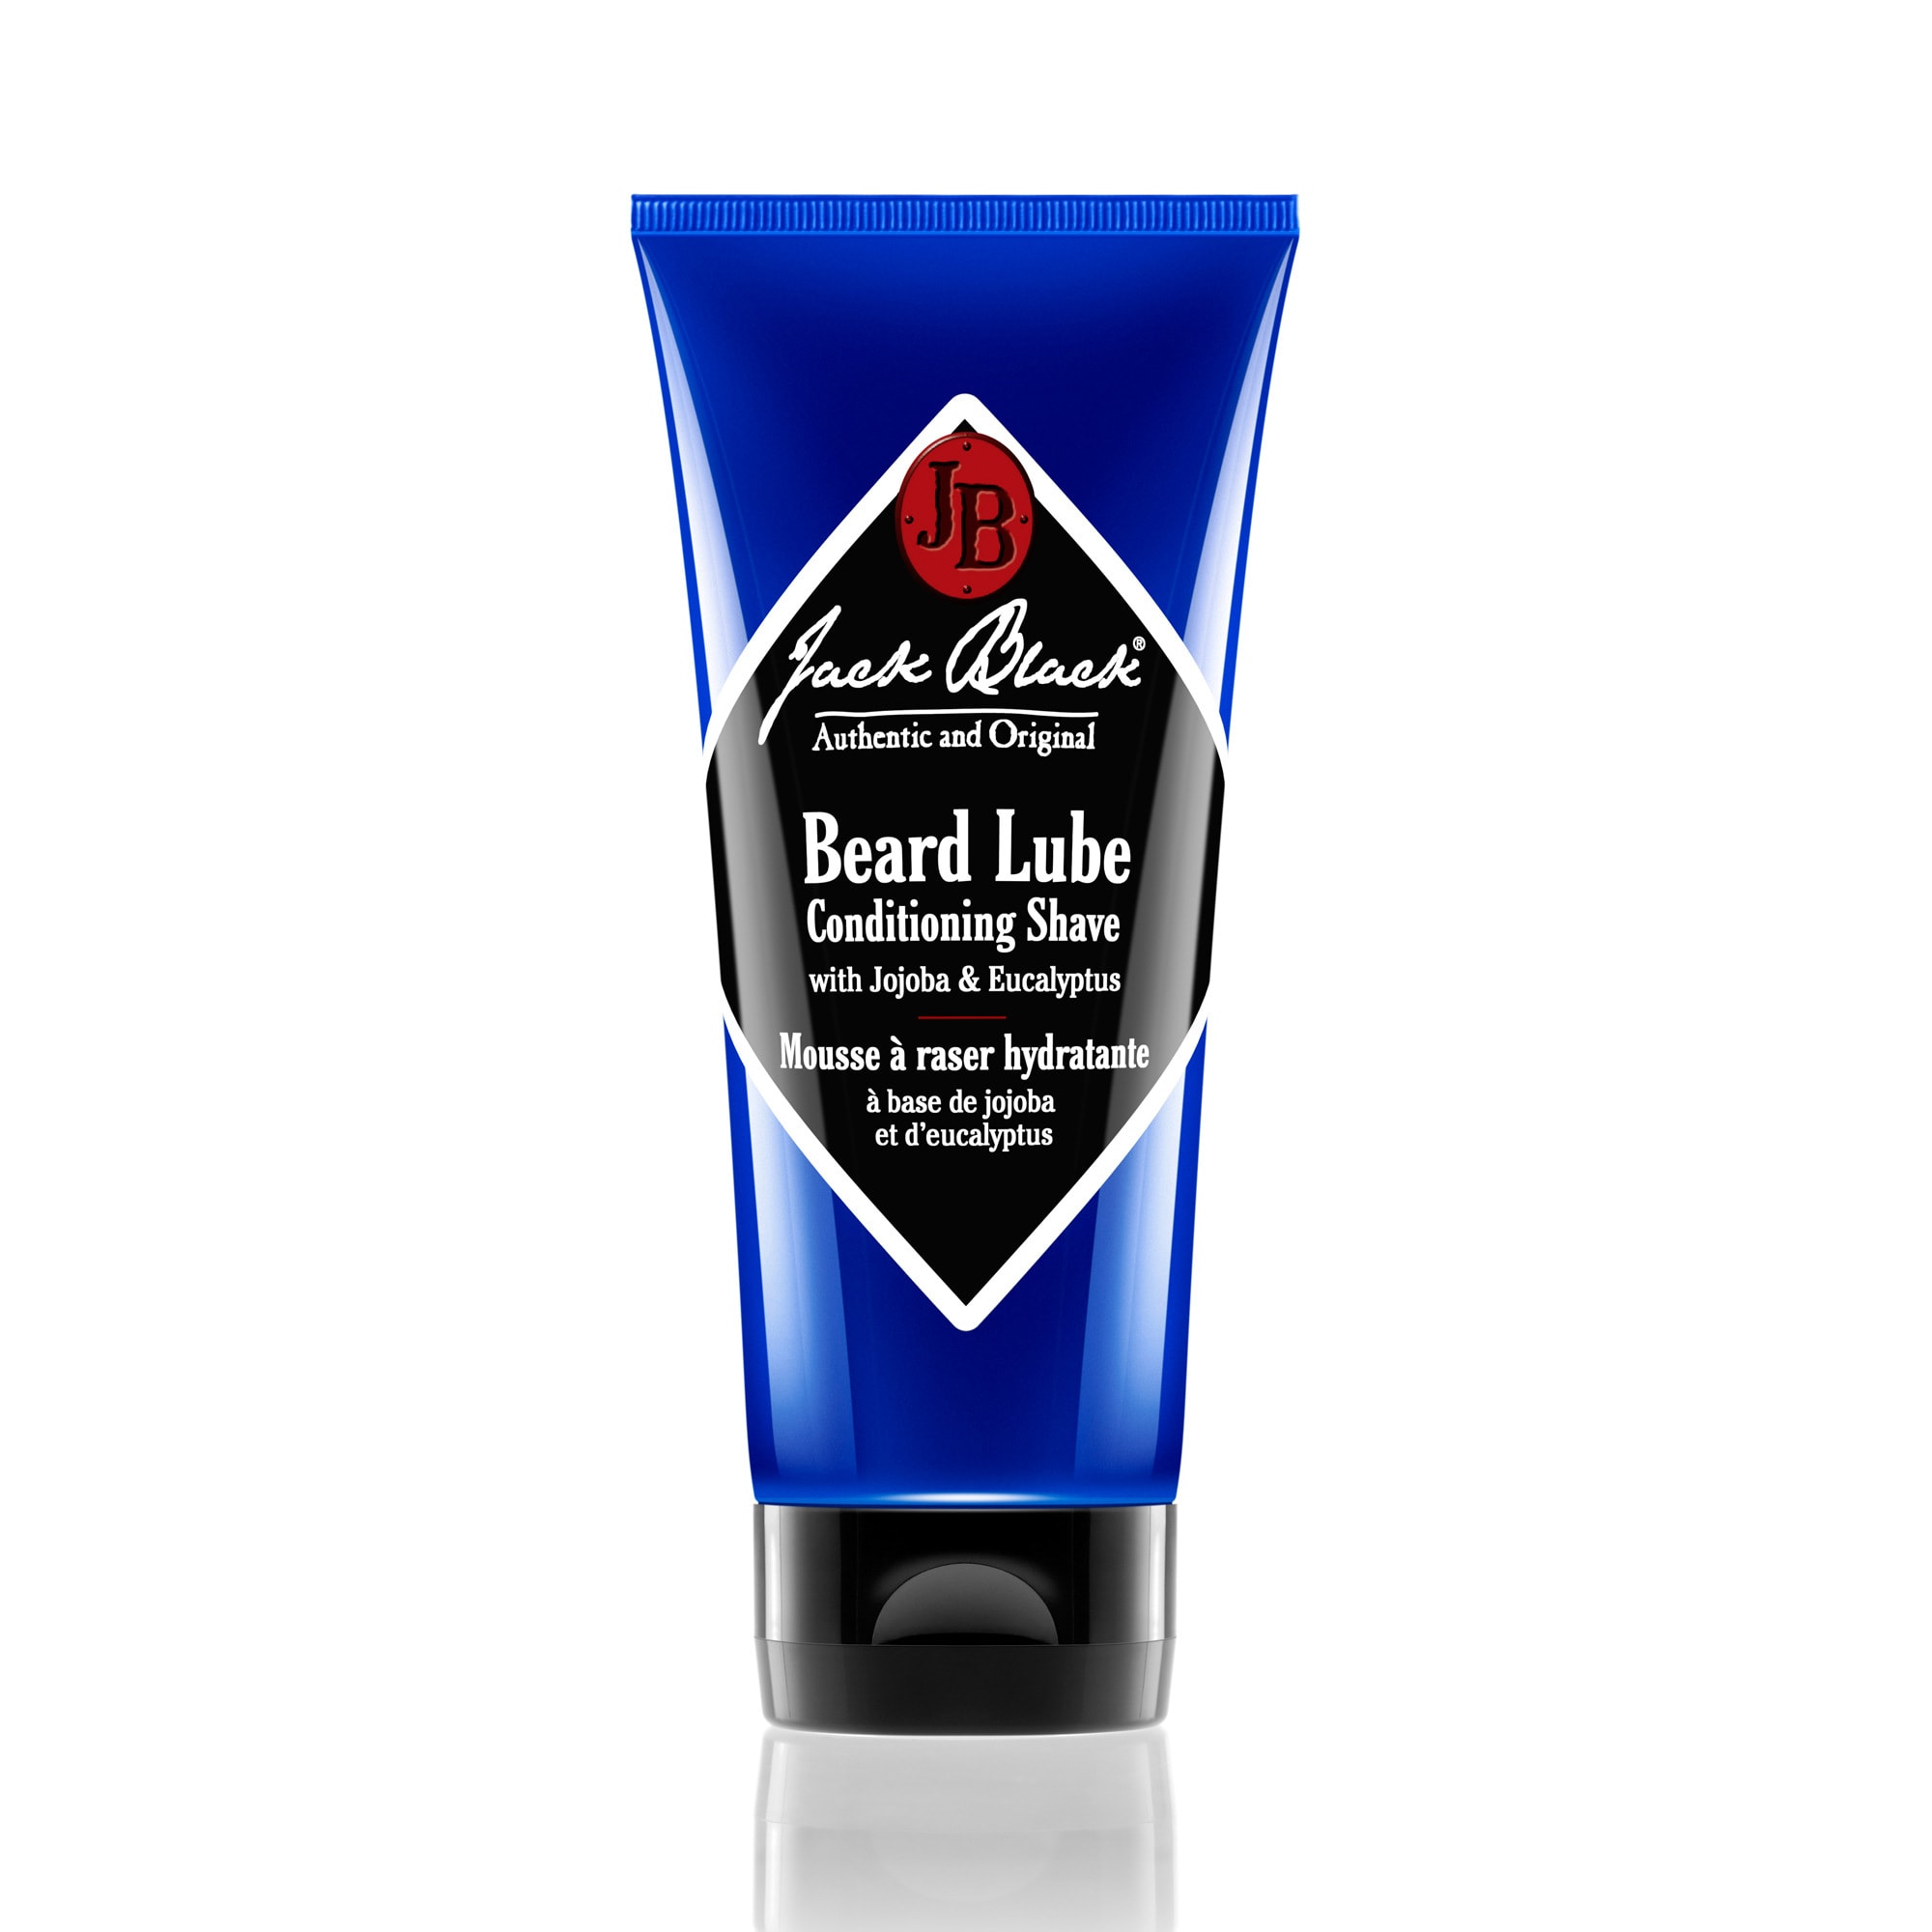 Beard Lube Conditioning Shave, 177 ml